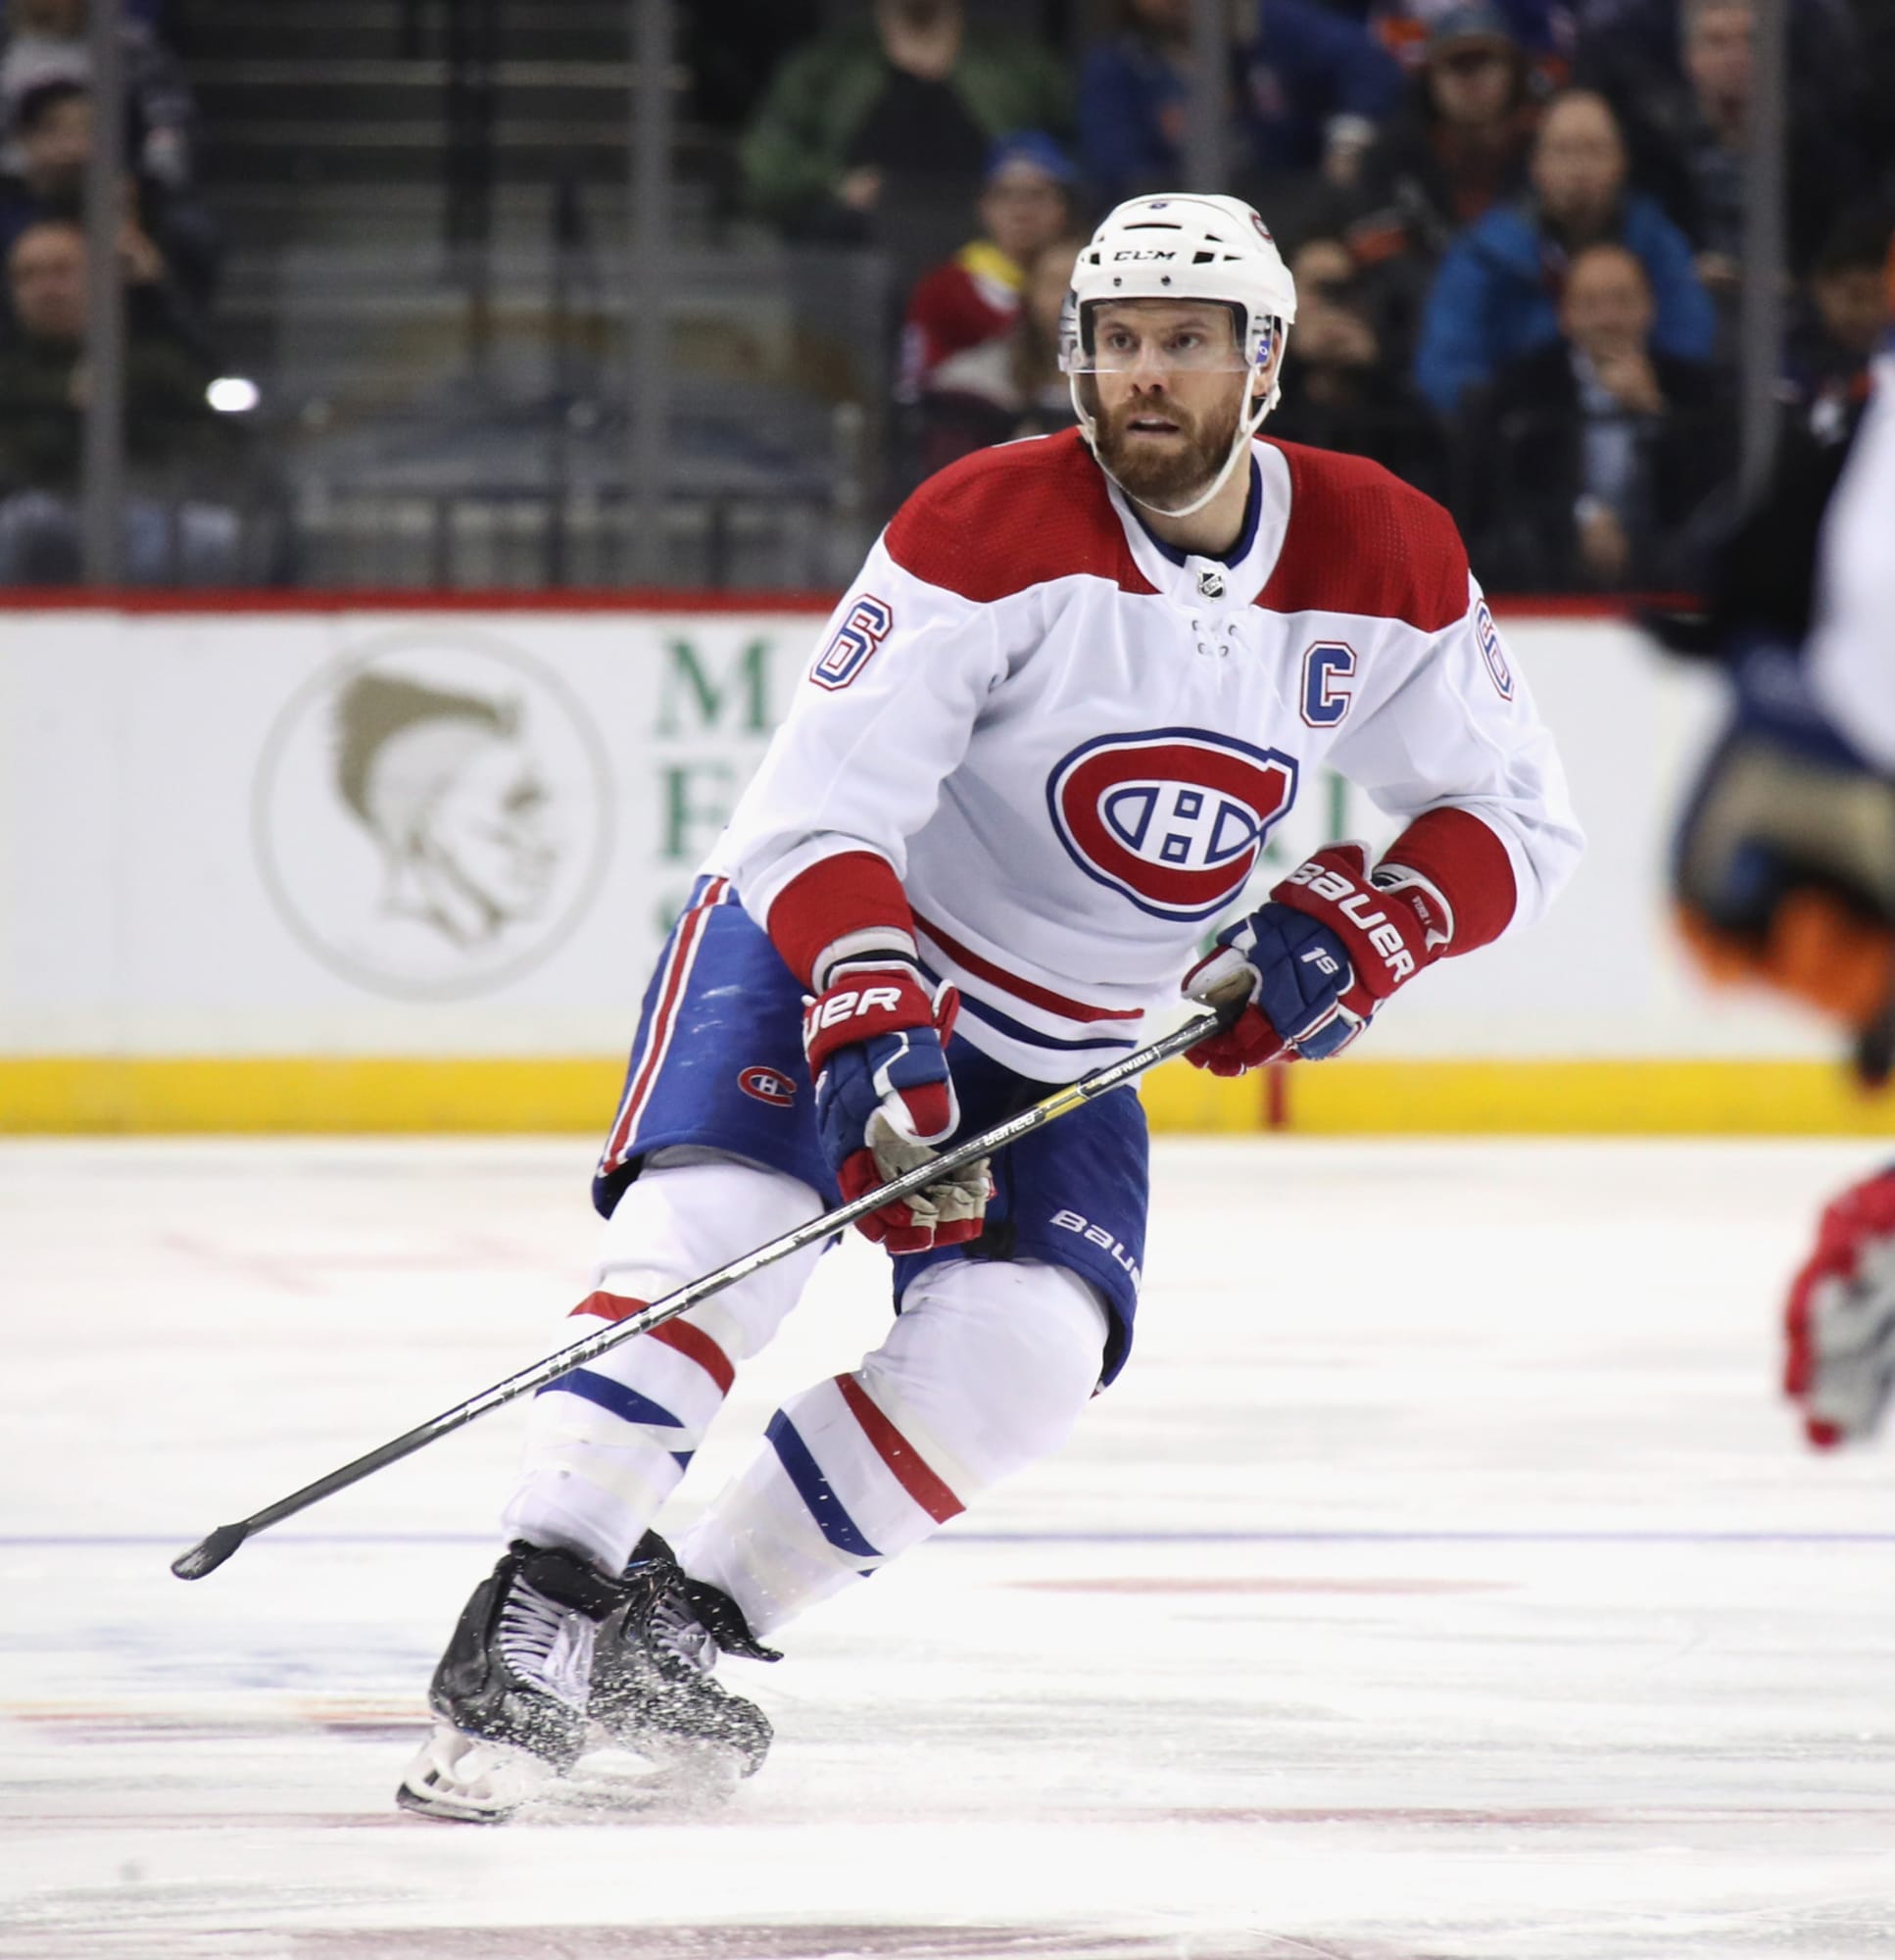 Shea Weber is Canadiens' nominee for Masterton Trophy